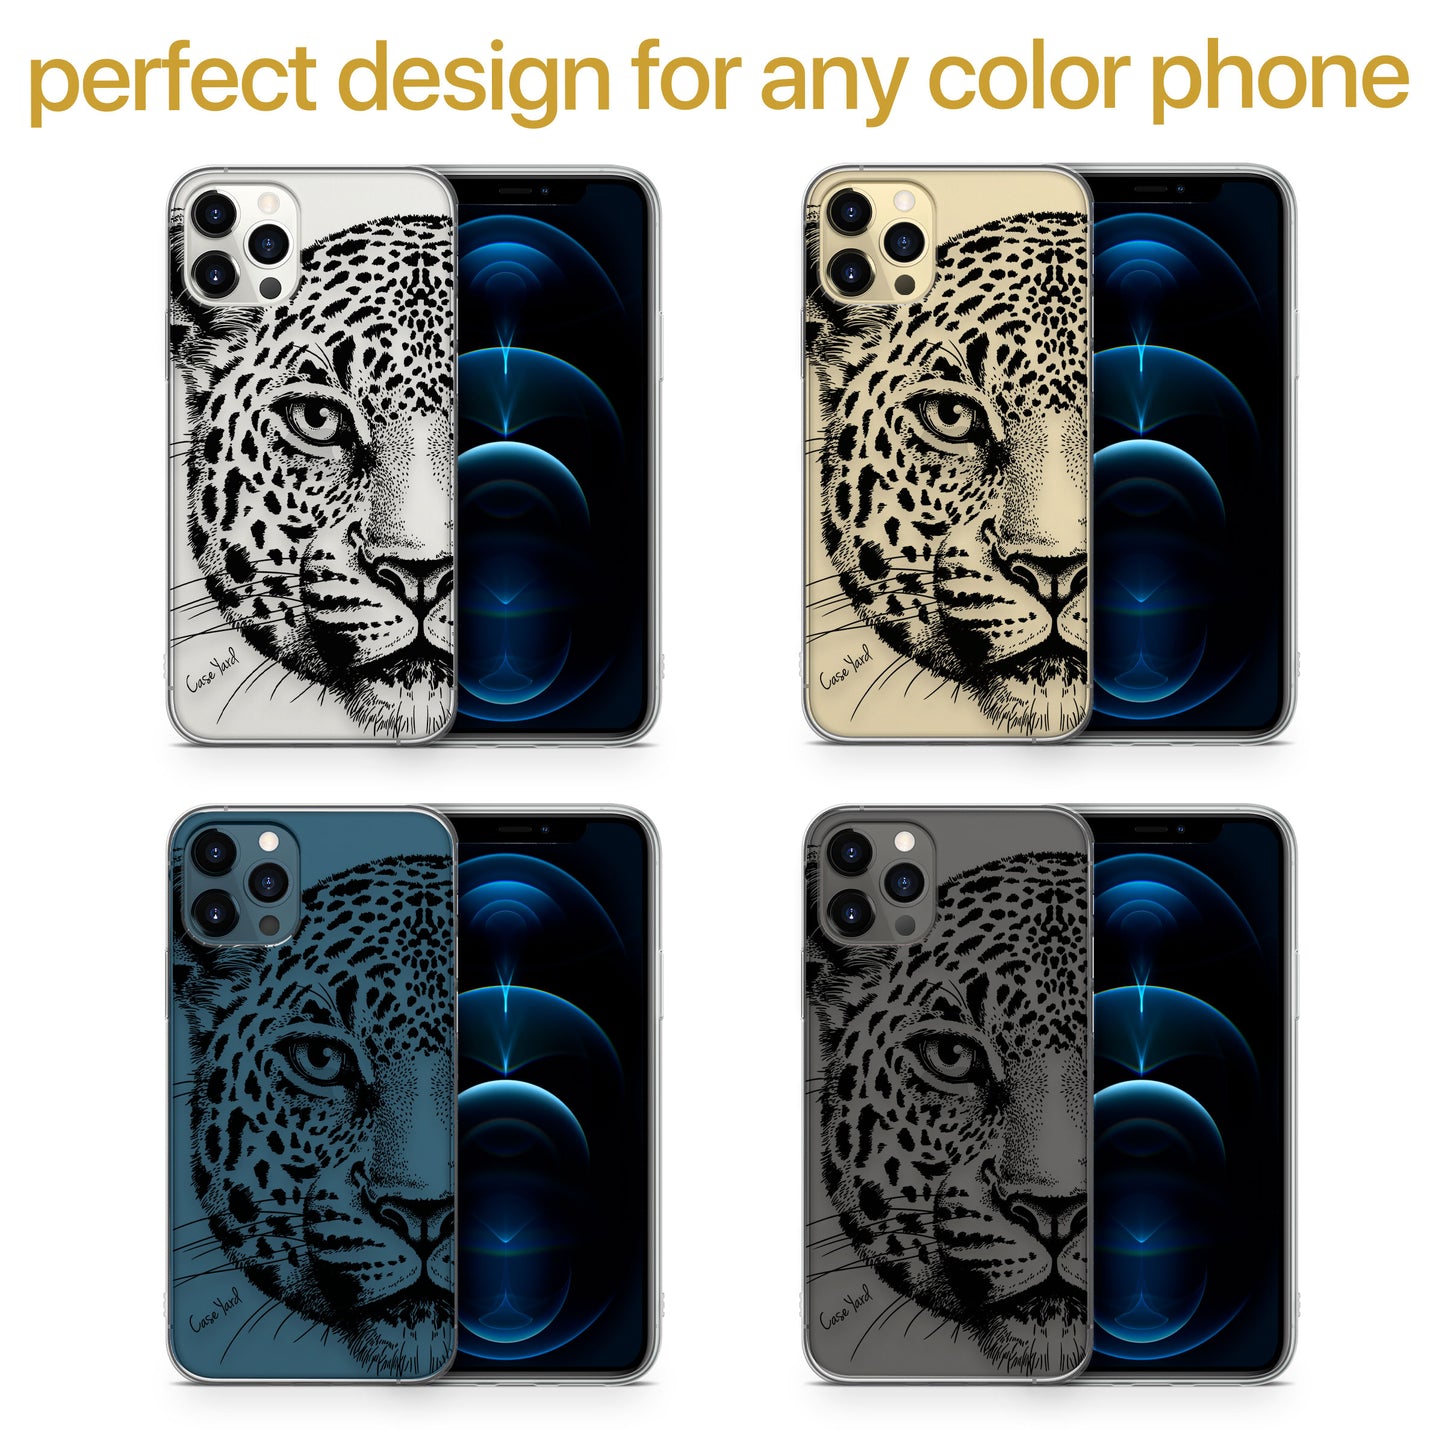 TPU Clear case with (Leopard Sketch) Design for iPhone & Samsung Phones